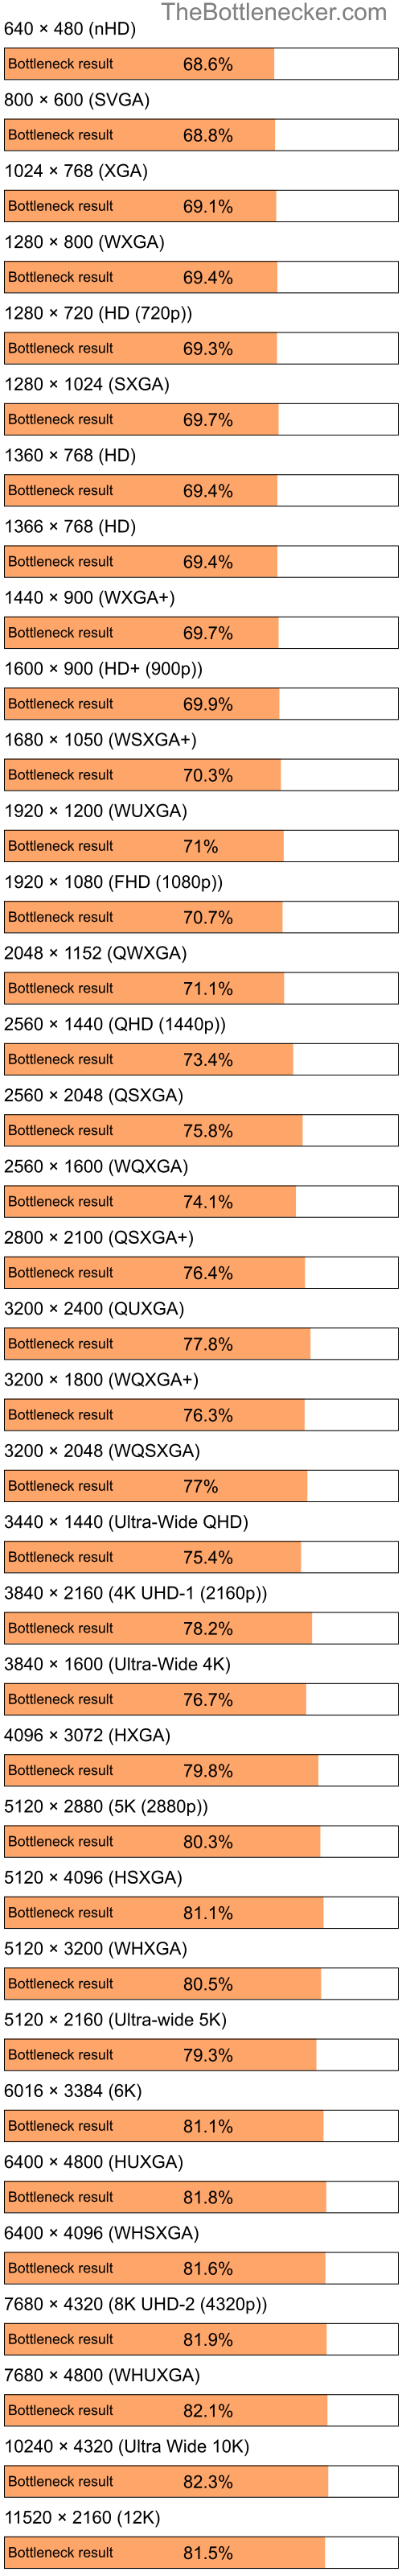 Bottleneck results by resolution for Intel Pentium 4 and NVIDIA GeForce 6200 TurboCache in General Tasks